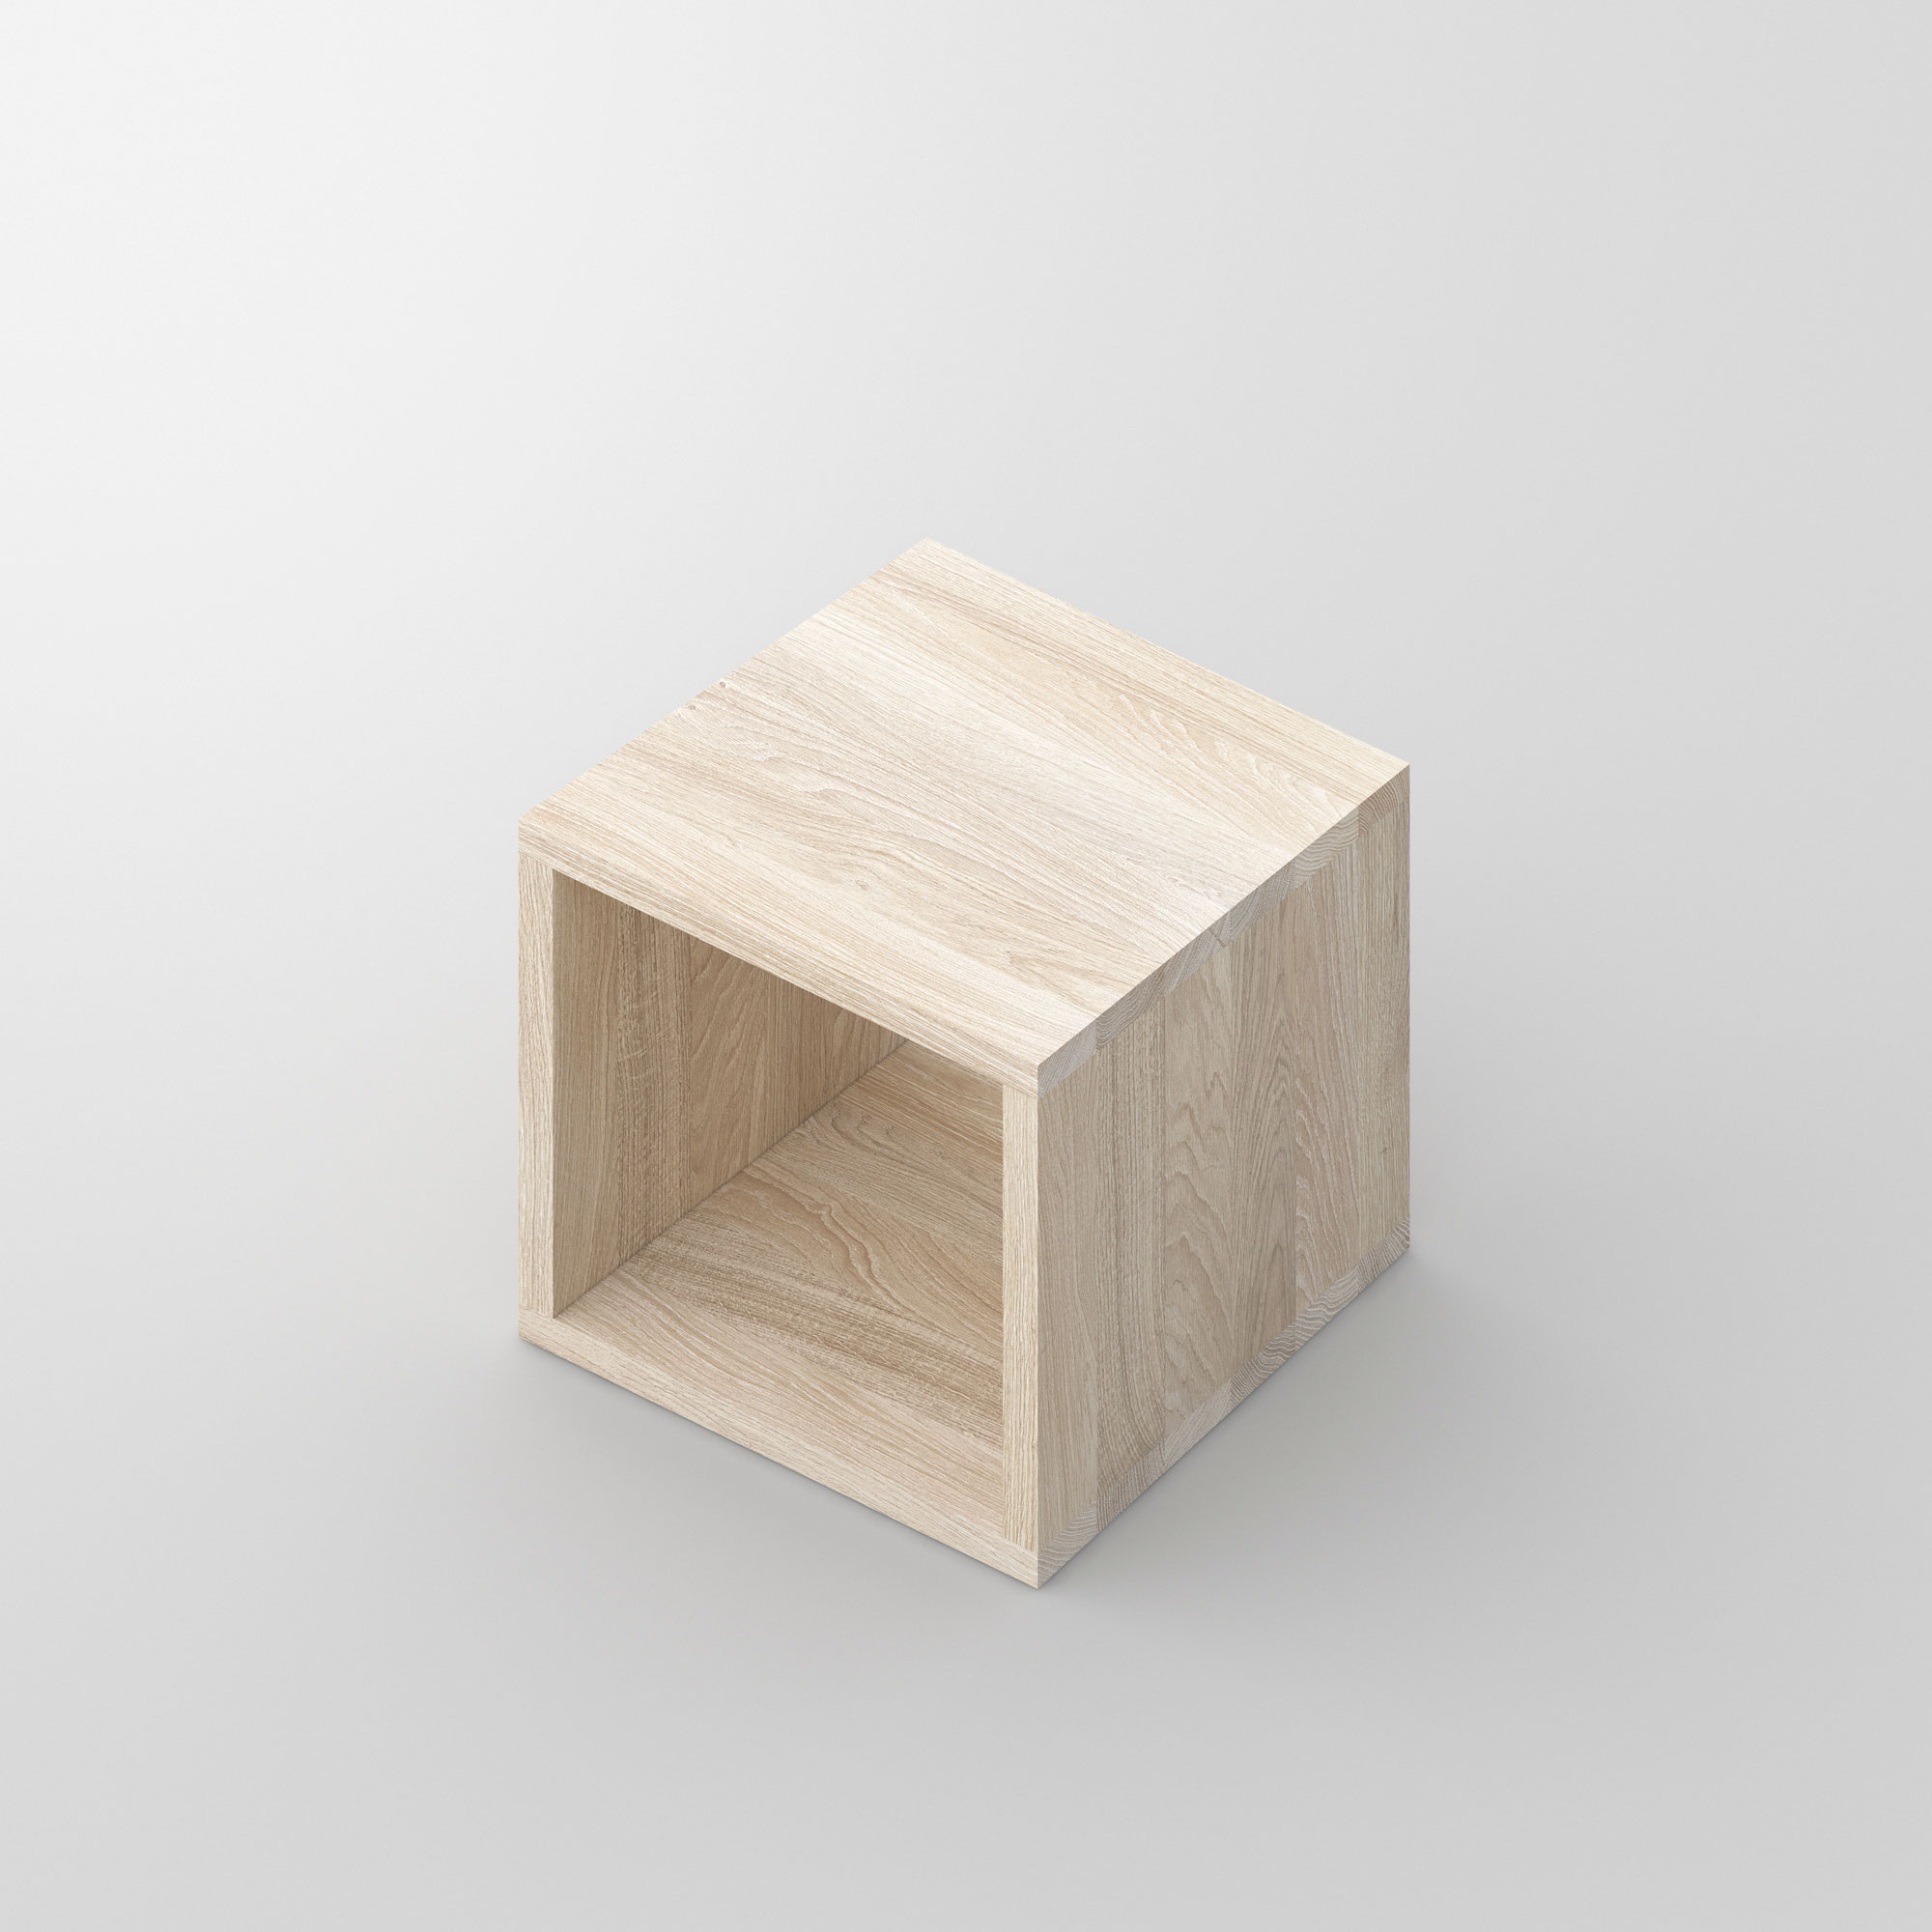 Multifunctional Wooden Coffee Table MENA B 3 cam3 custom made in solid wood by vitamin design